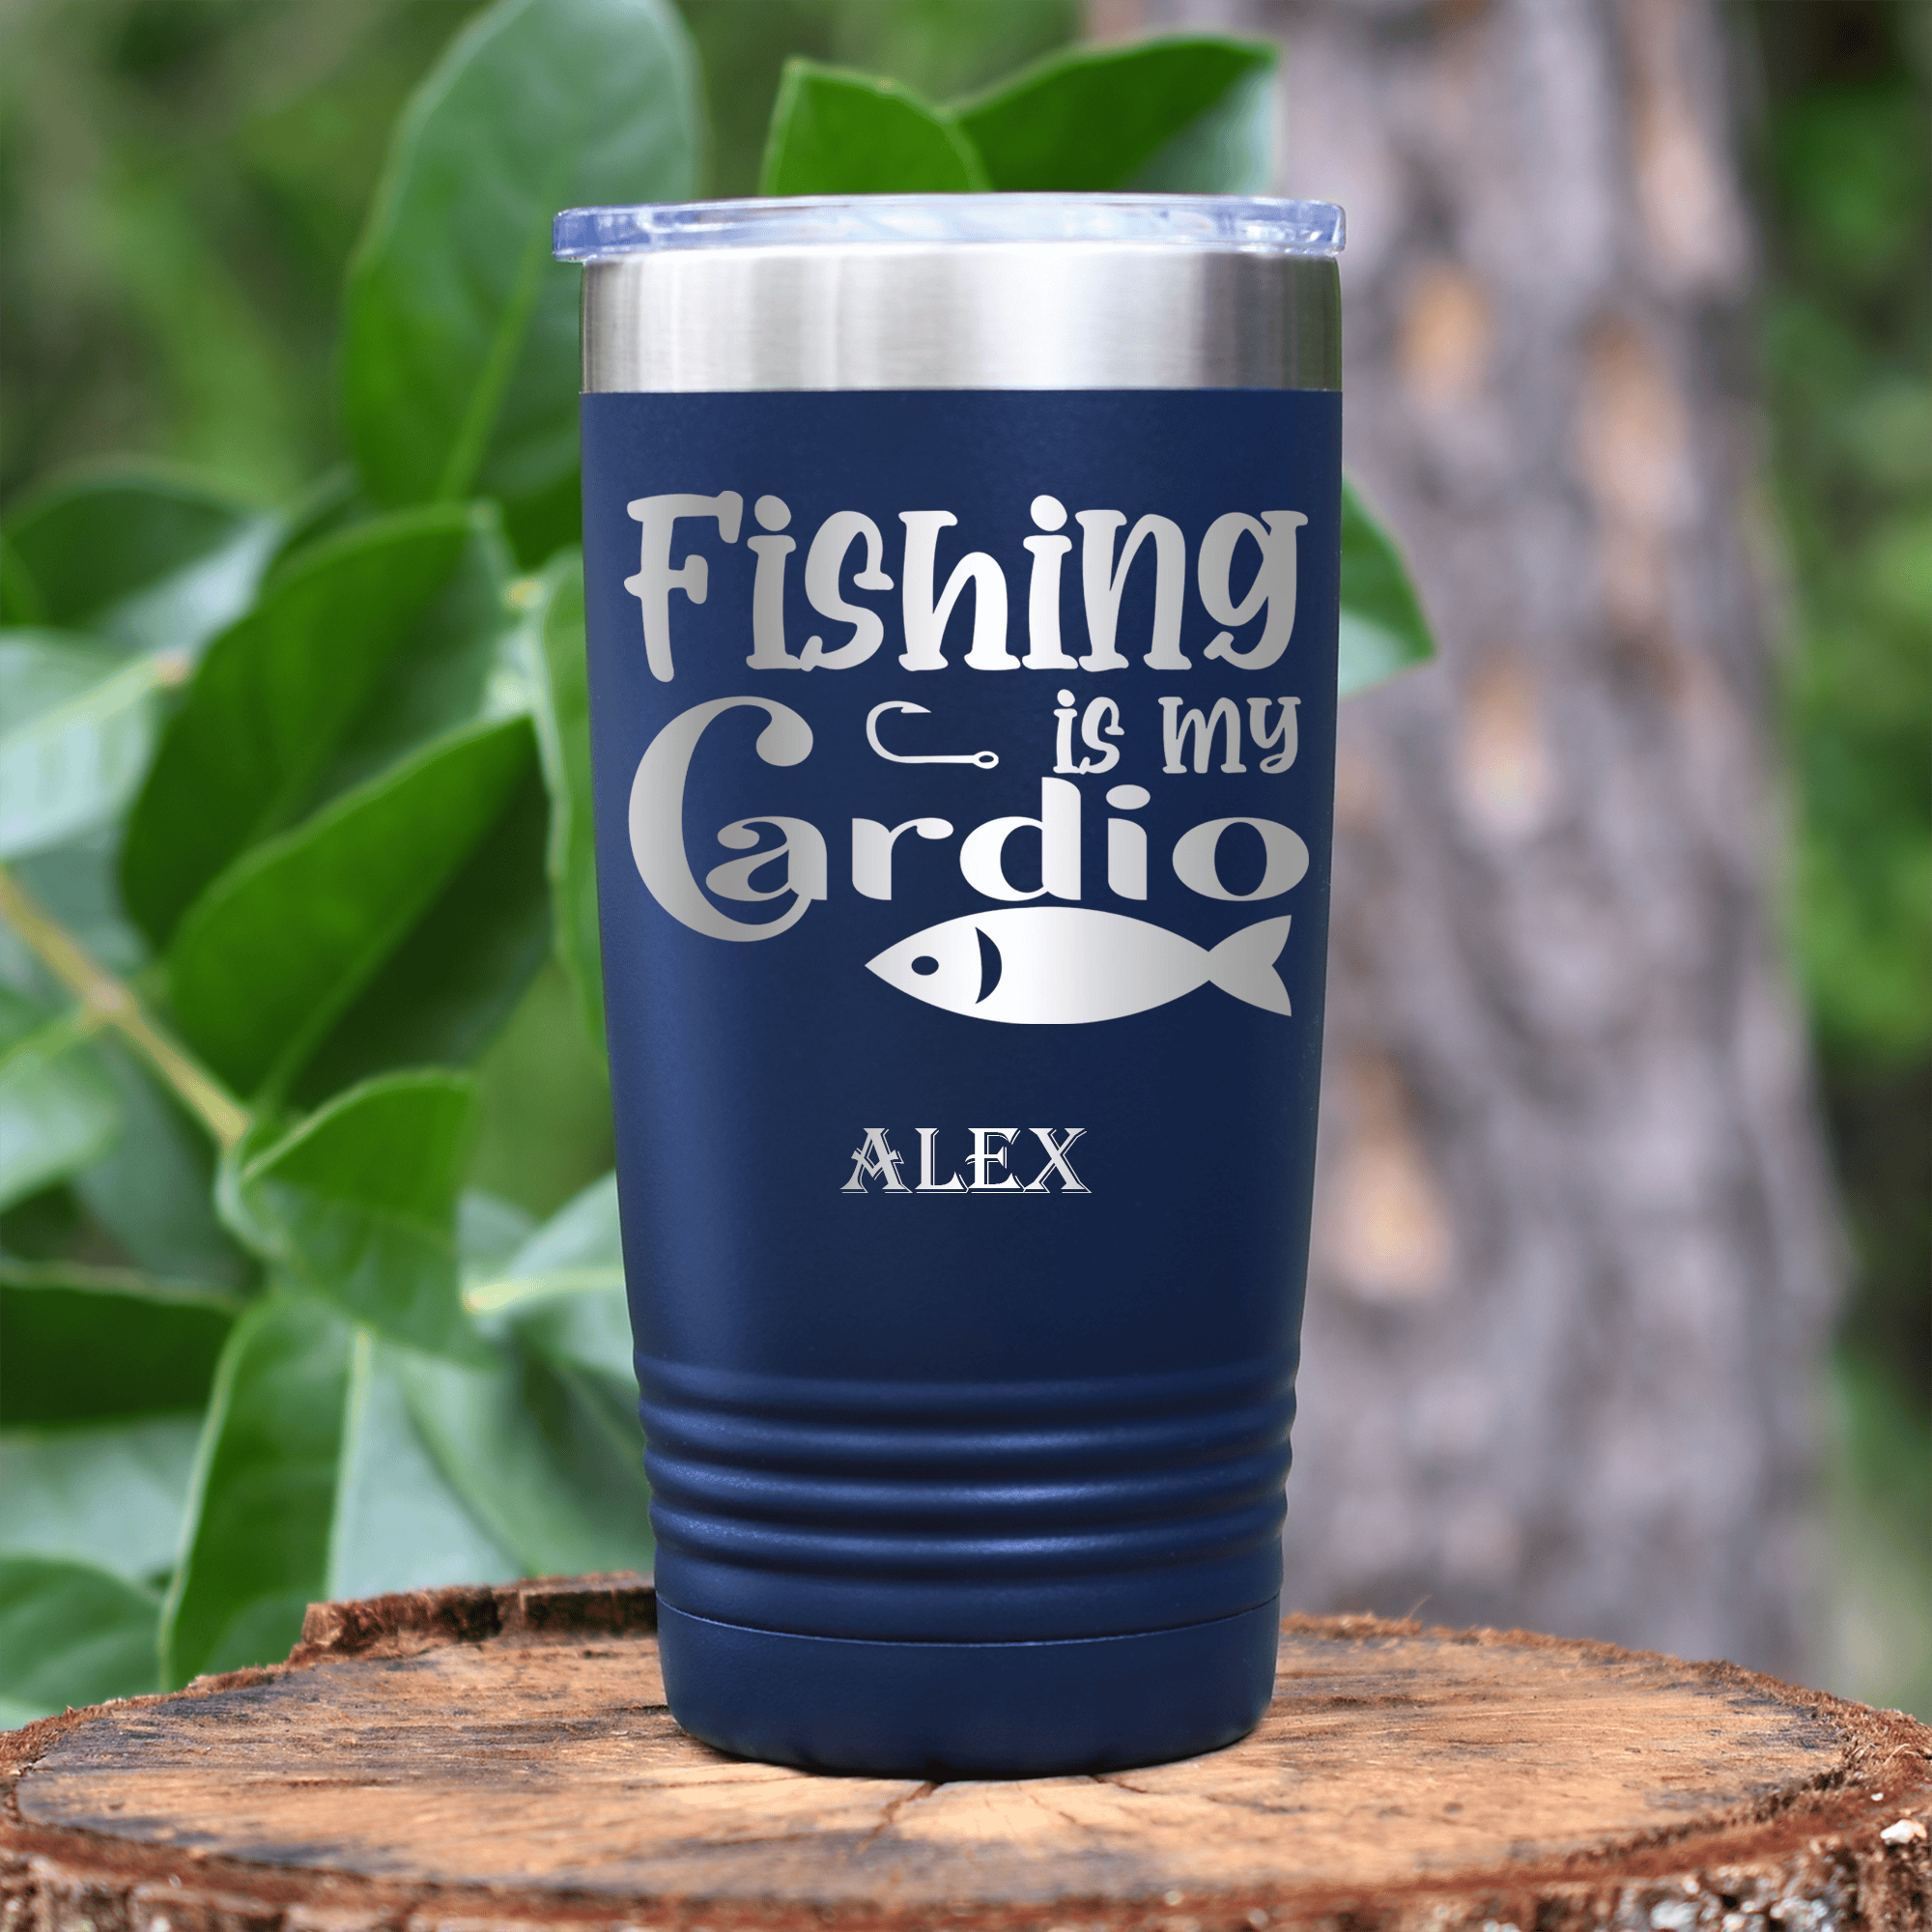 GiftsForYouNow Embroidered Hooked on Grandpa Personalized Fishing Towel,  Navy